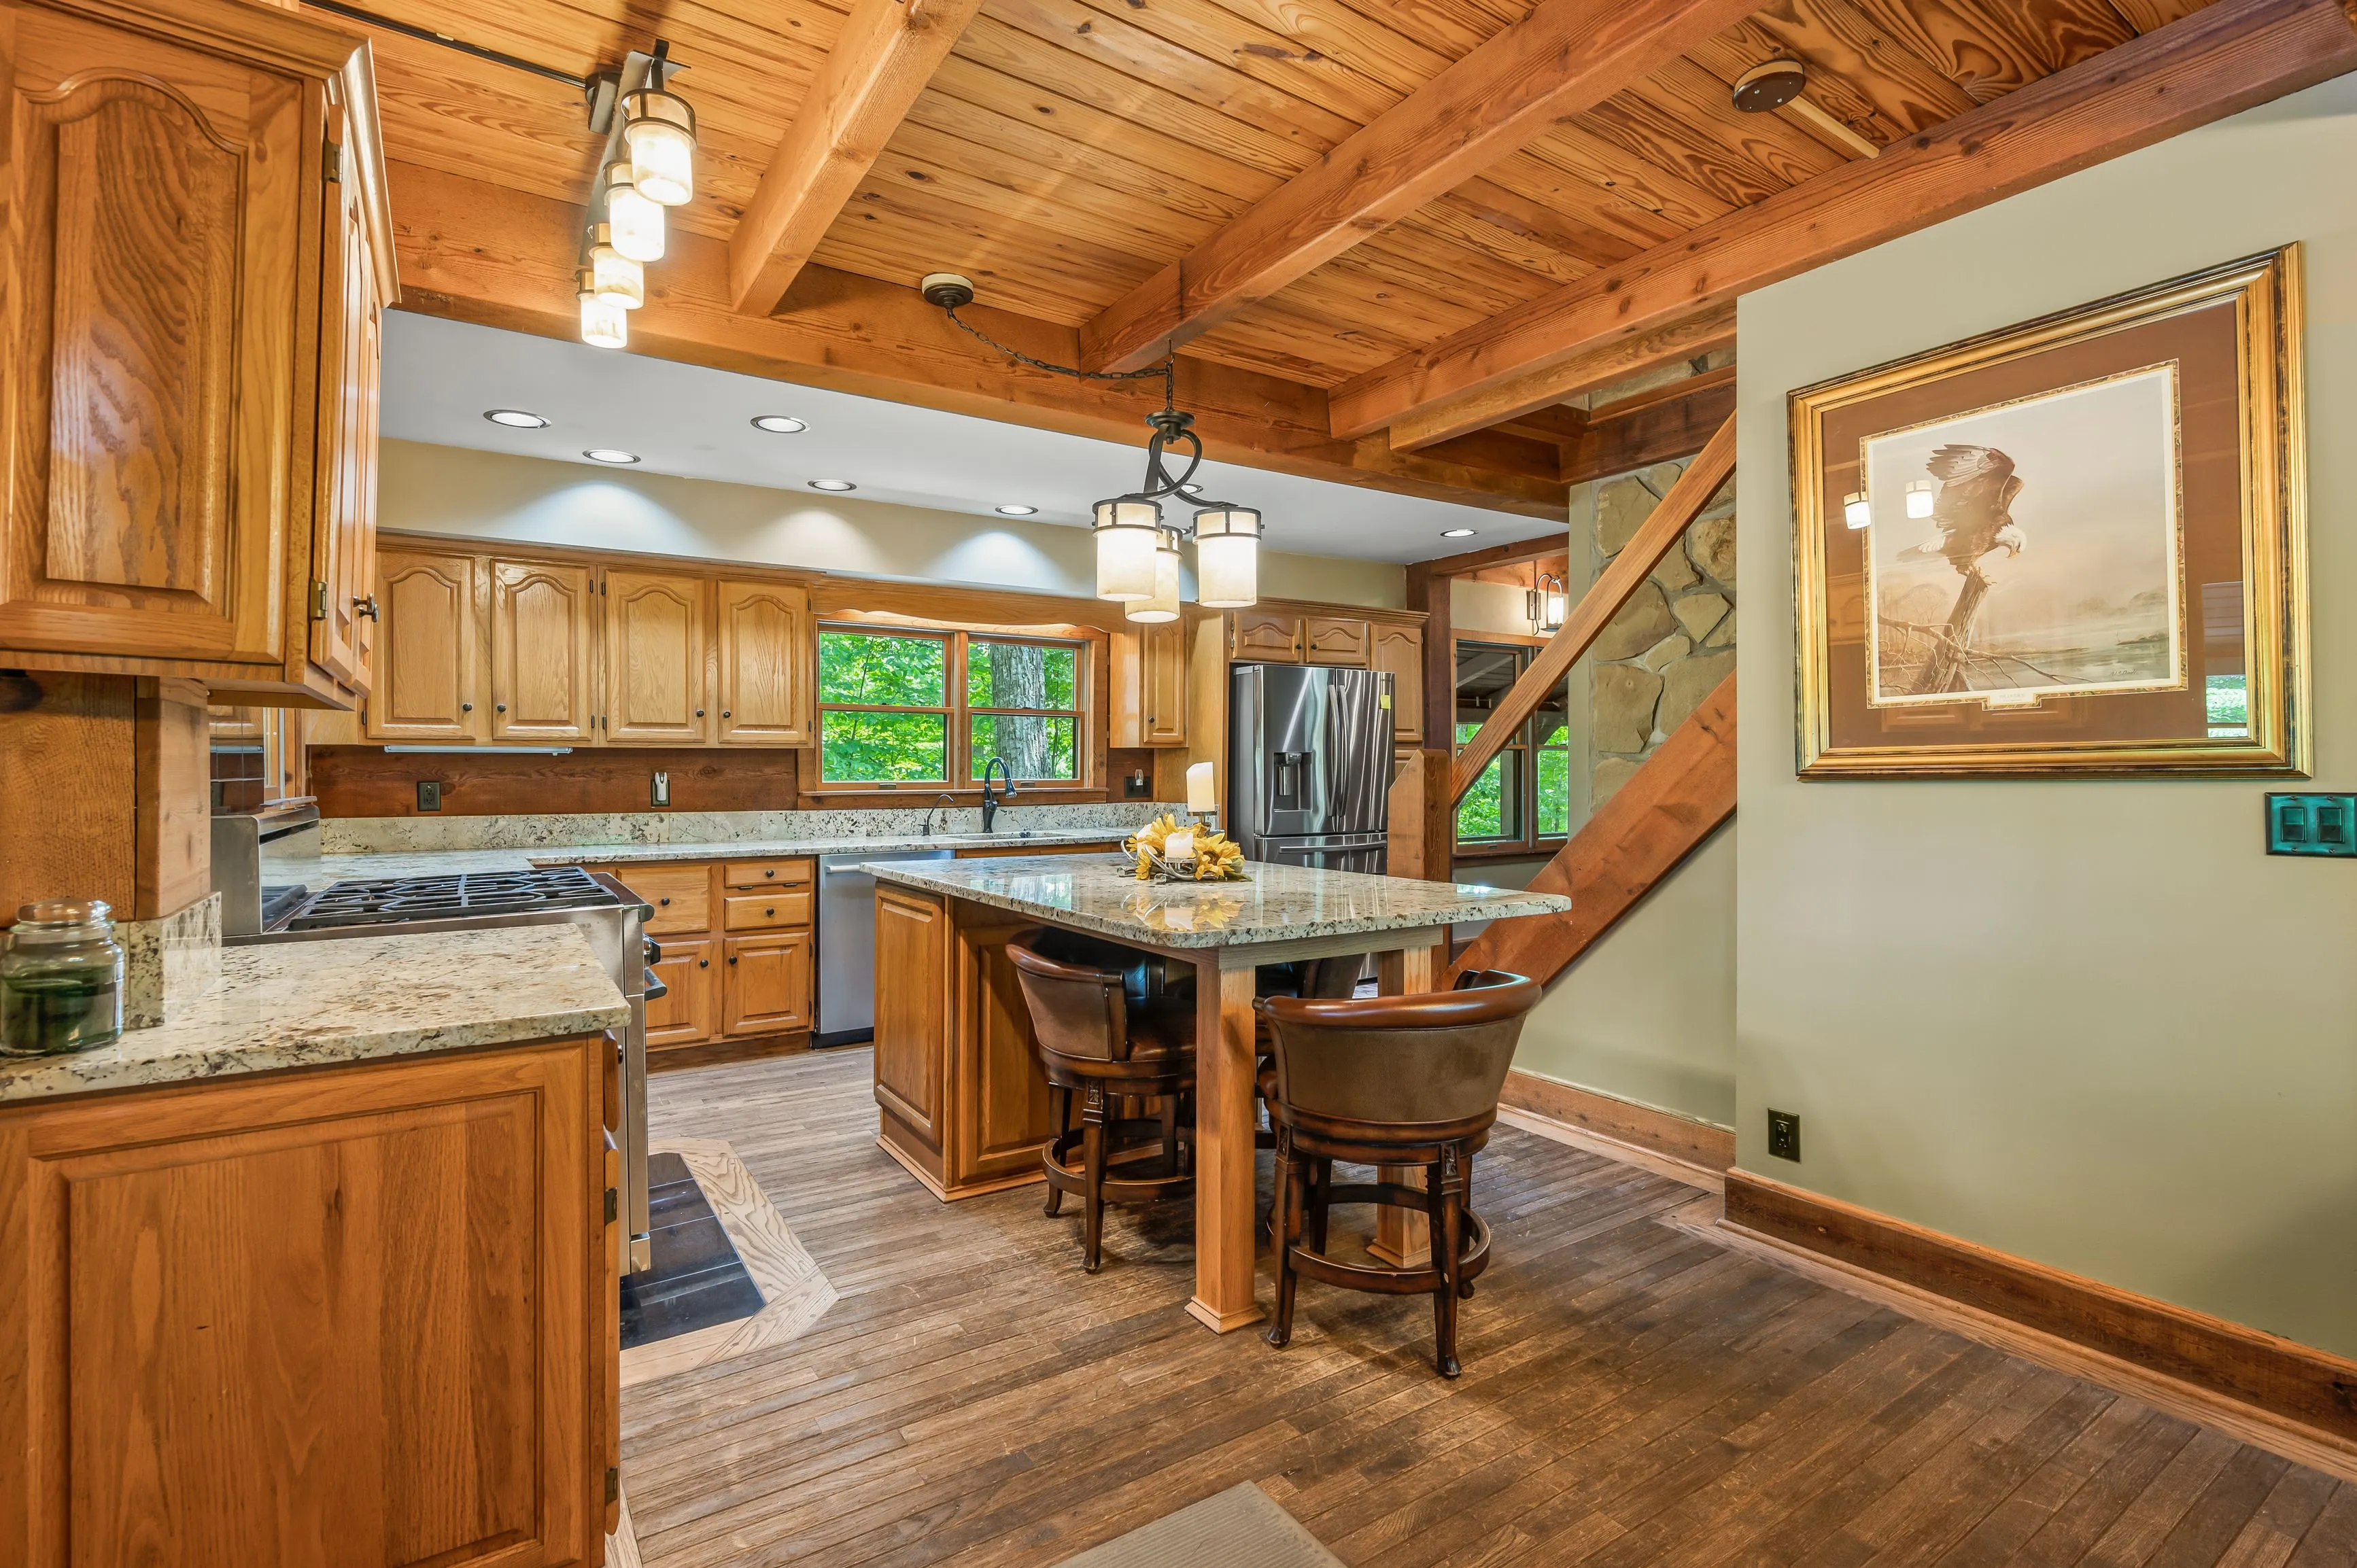 Spacious kitchen interior with wooden cabinets, granite countertops, and a central island with bar stools, featuring exposed wooden beams and a framed picture on the wall.